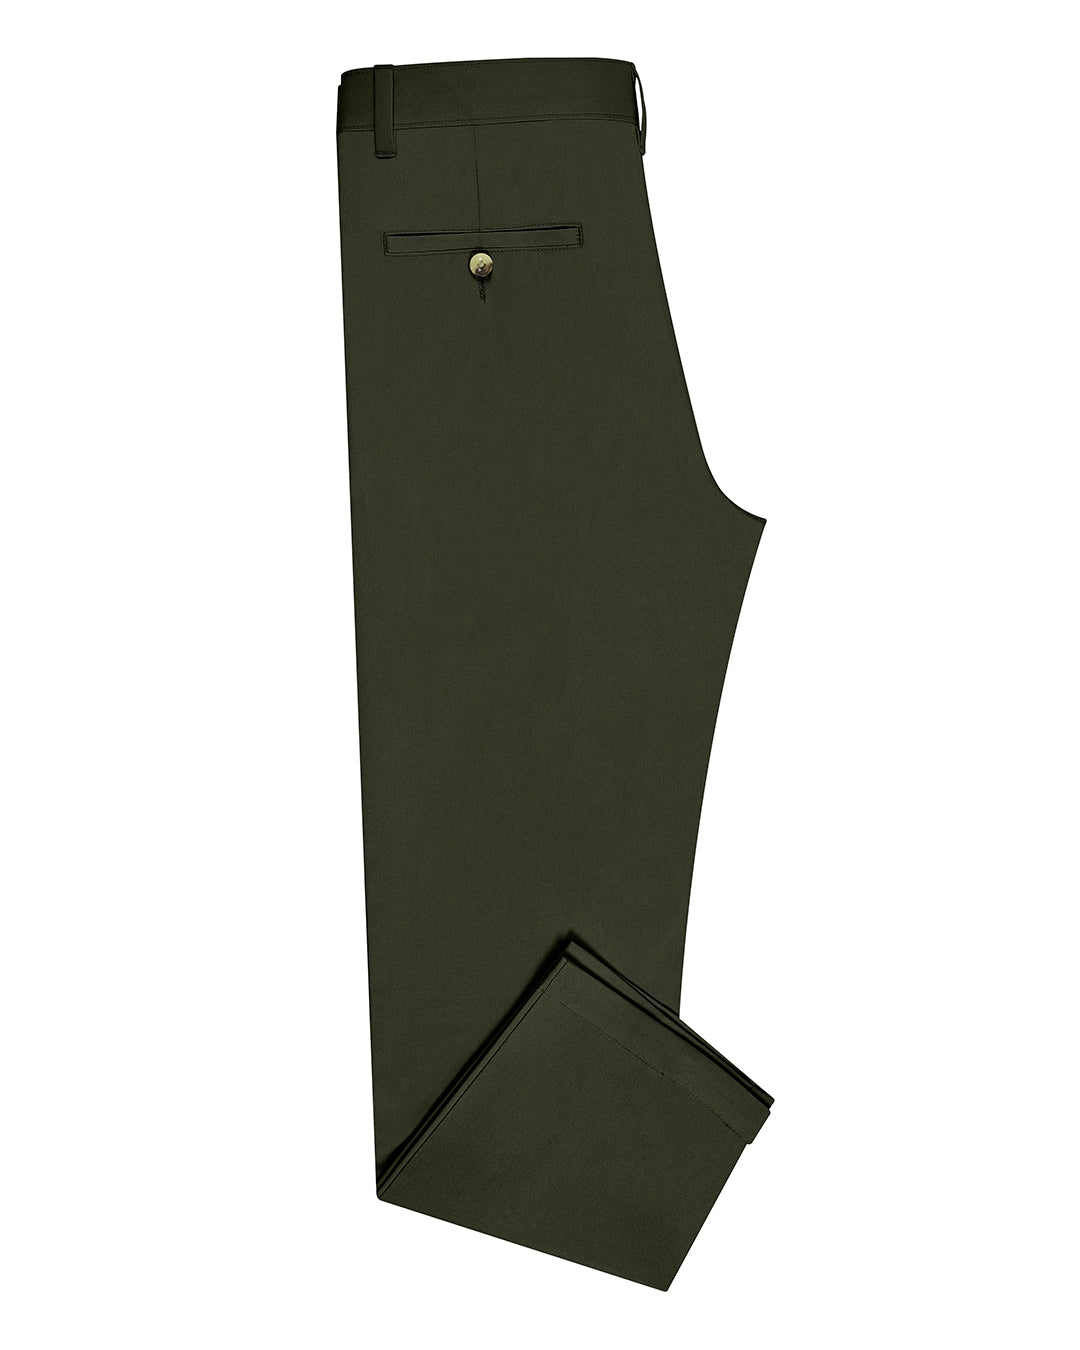 Side view of custom Genoa Chino pants for men by Luxire in olive green